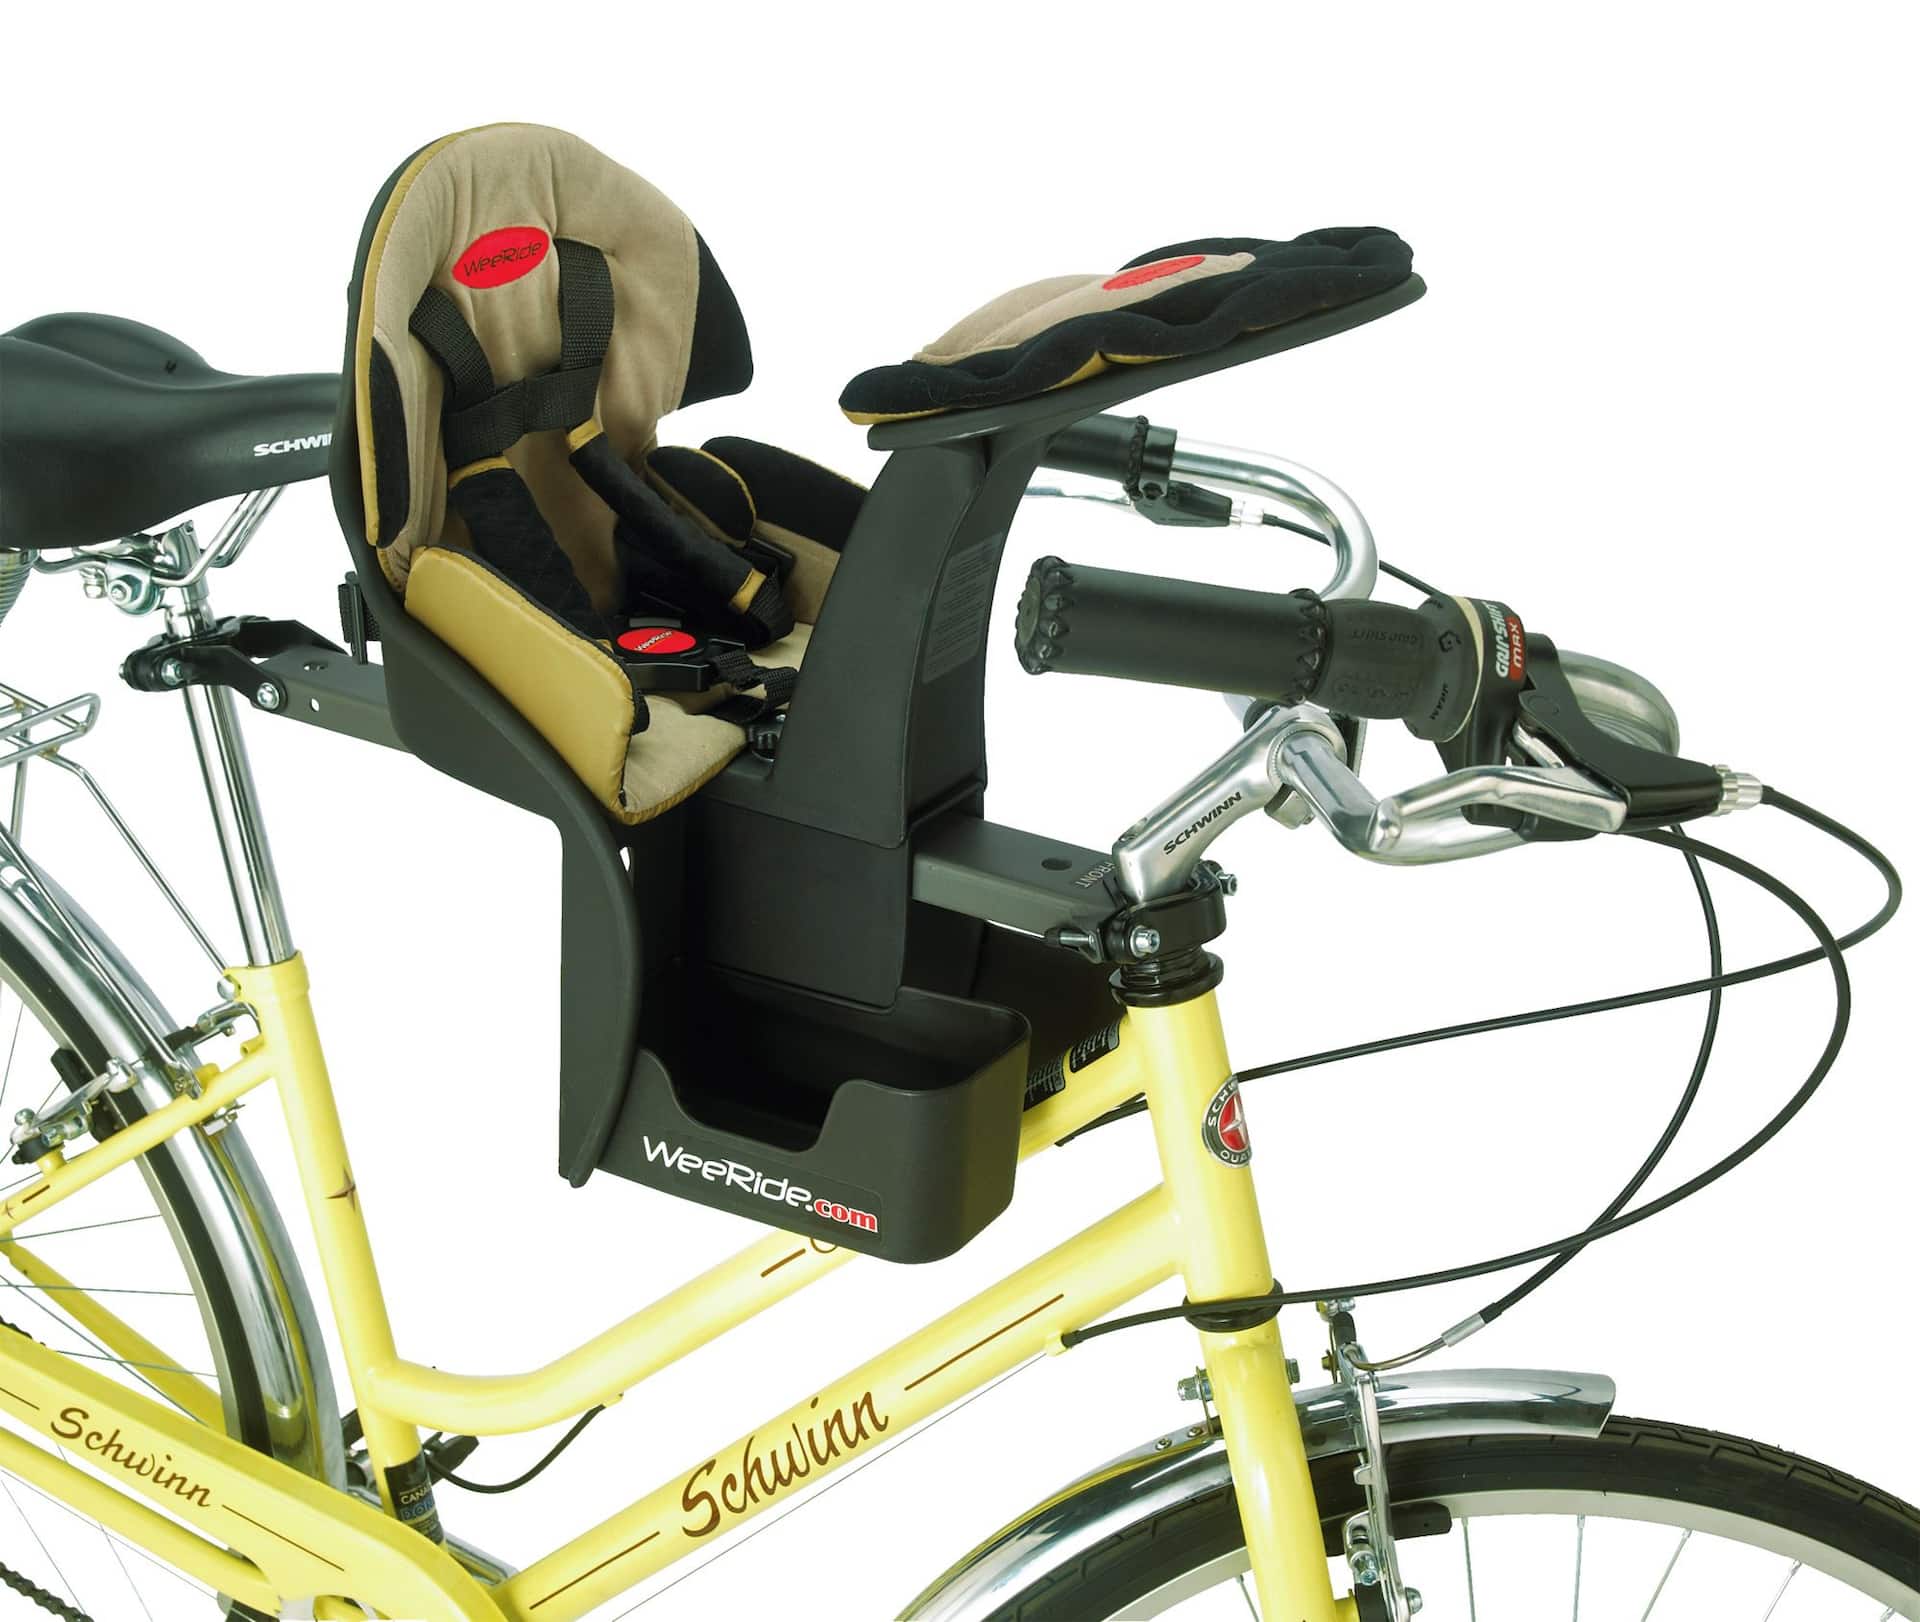 https://media-www.canadiantire.ca/product/playing/cycling/bicycle-accessories/0733614/weeride-kangaroo-bike-child-carrier-d4eecbb5-9677-41bb-8245-9a85a00f24c6-jpgrendition.jpg